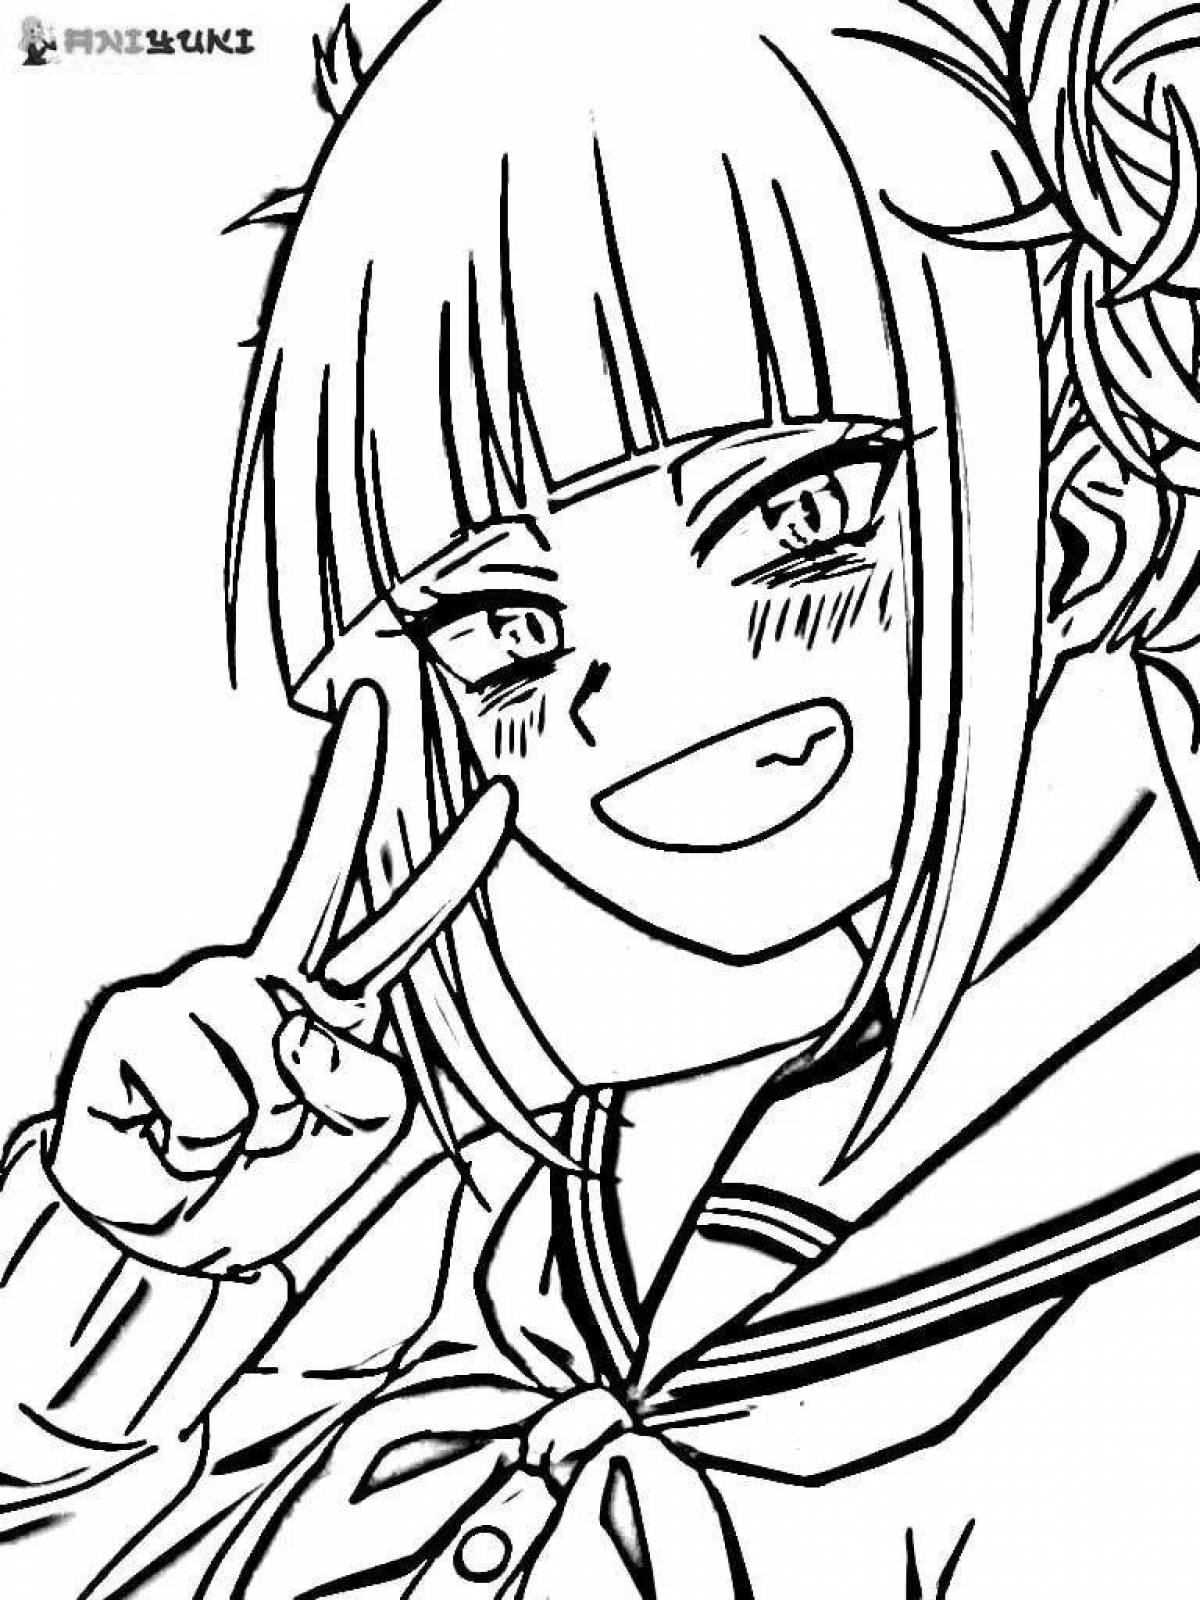 Himiko toga coloring page